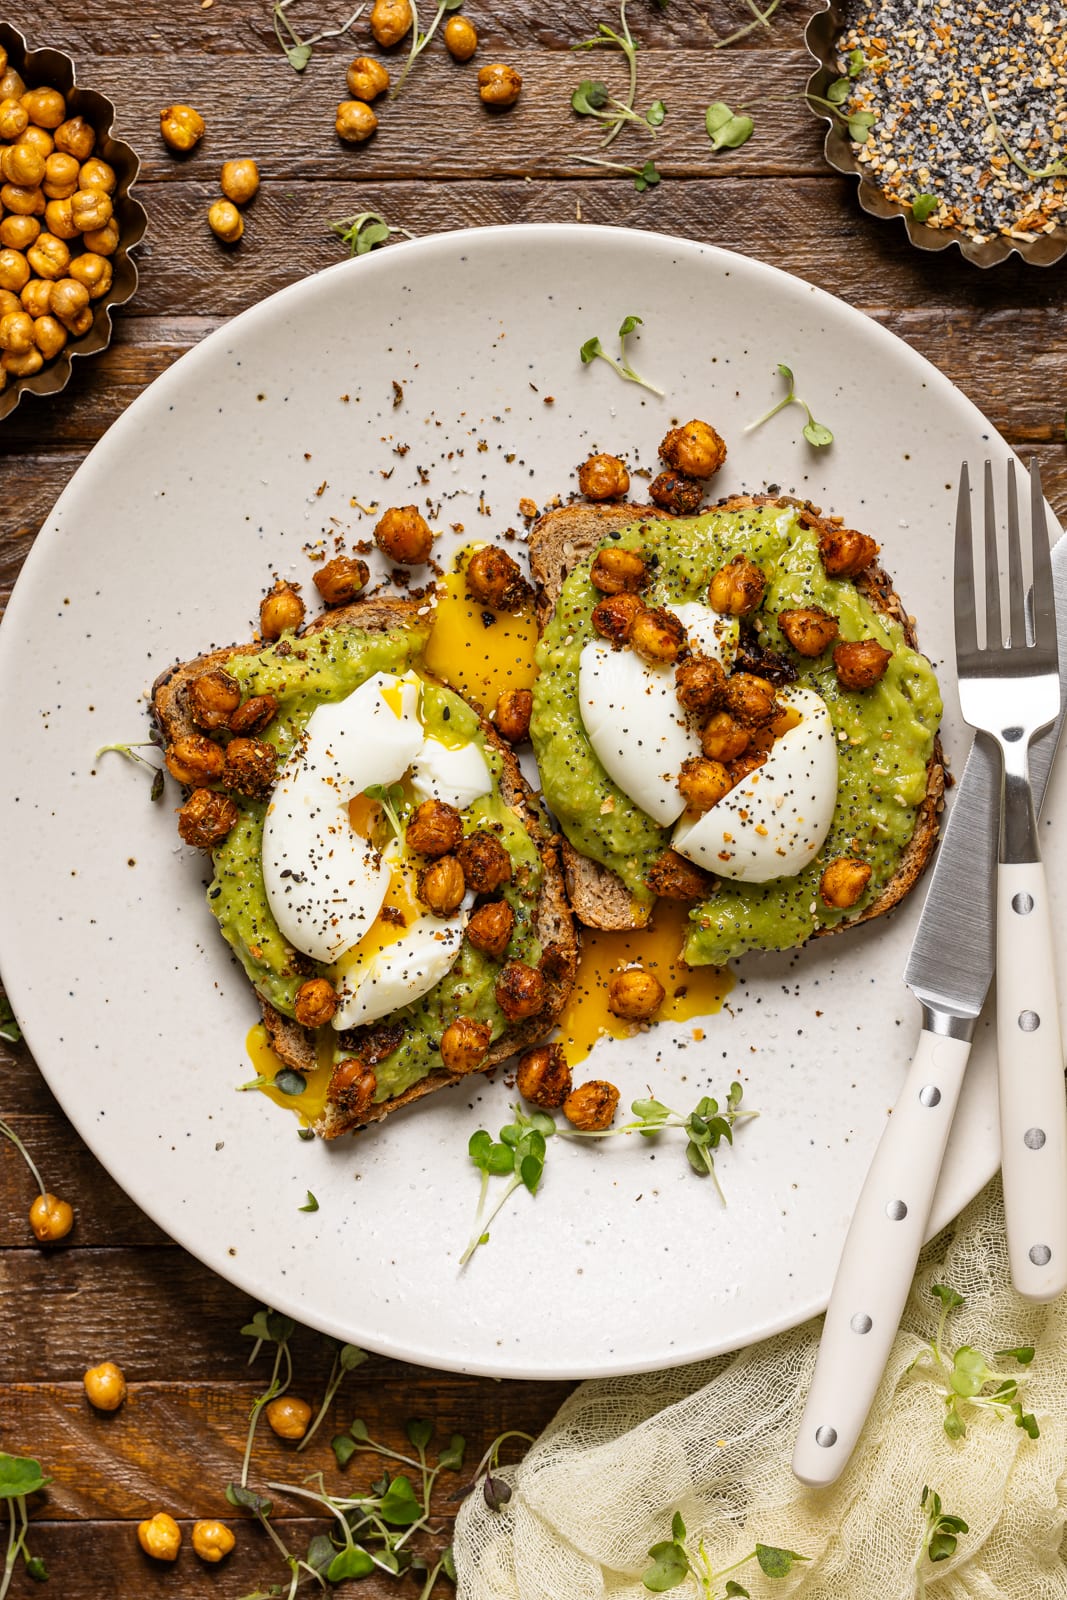 Avocado toast on a white plate with a fork and side of roasted chickpeas.